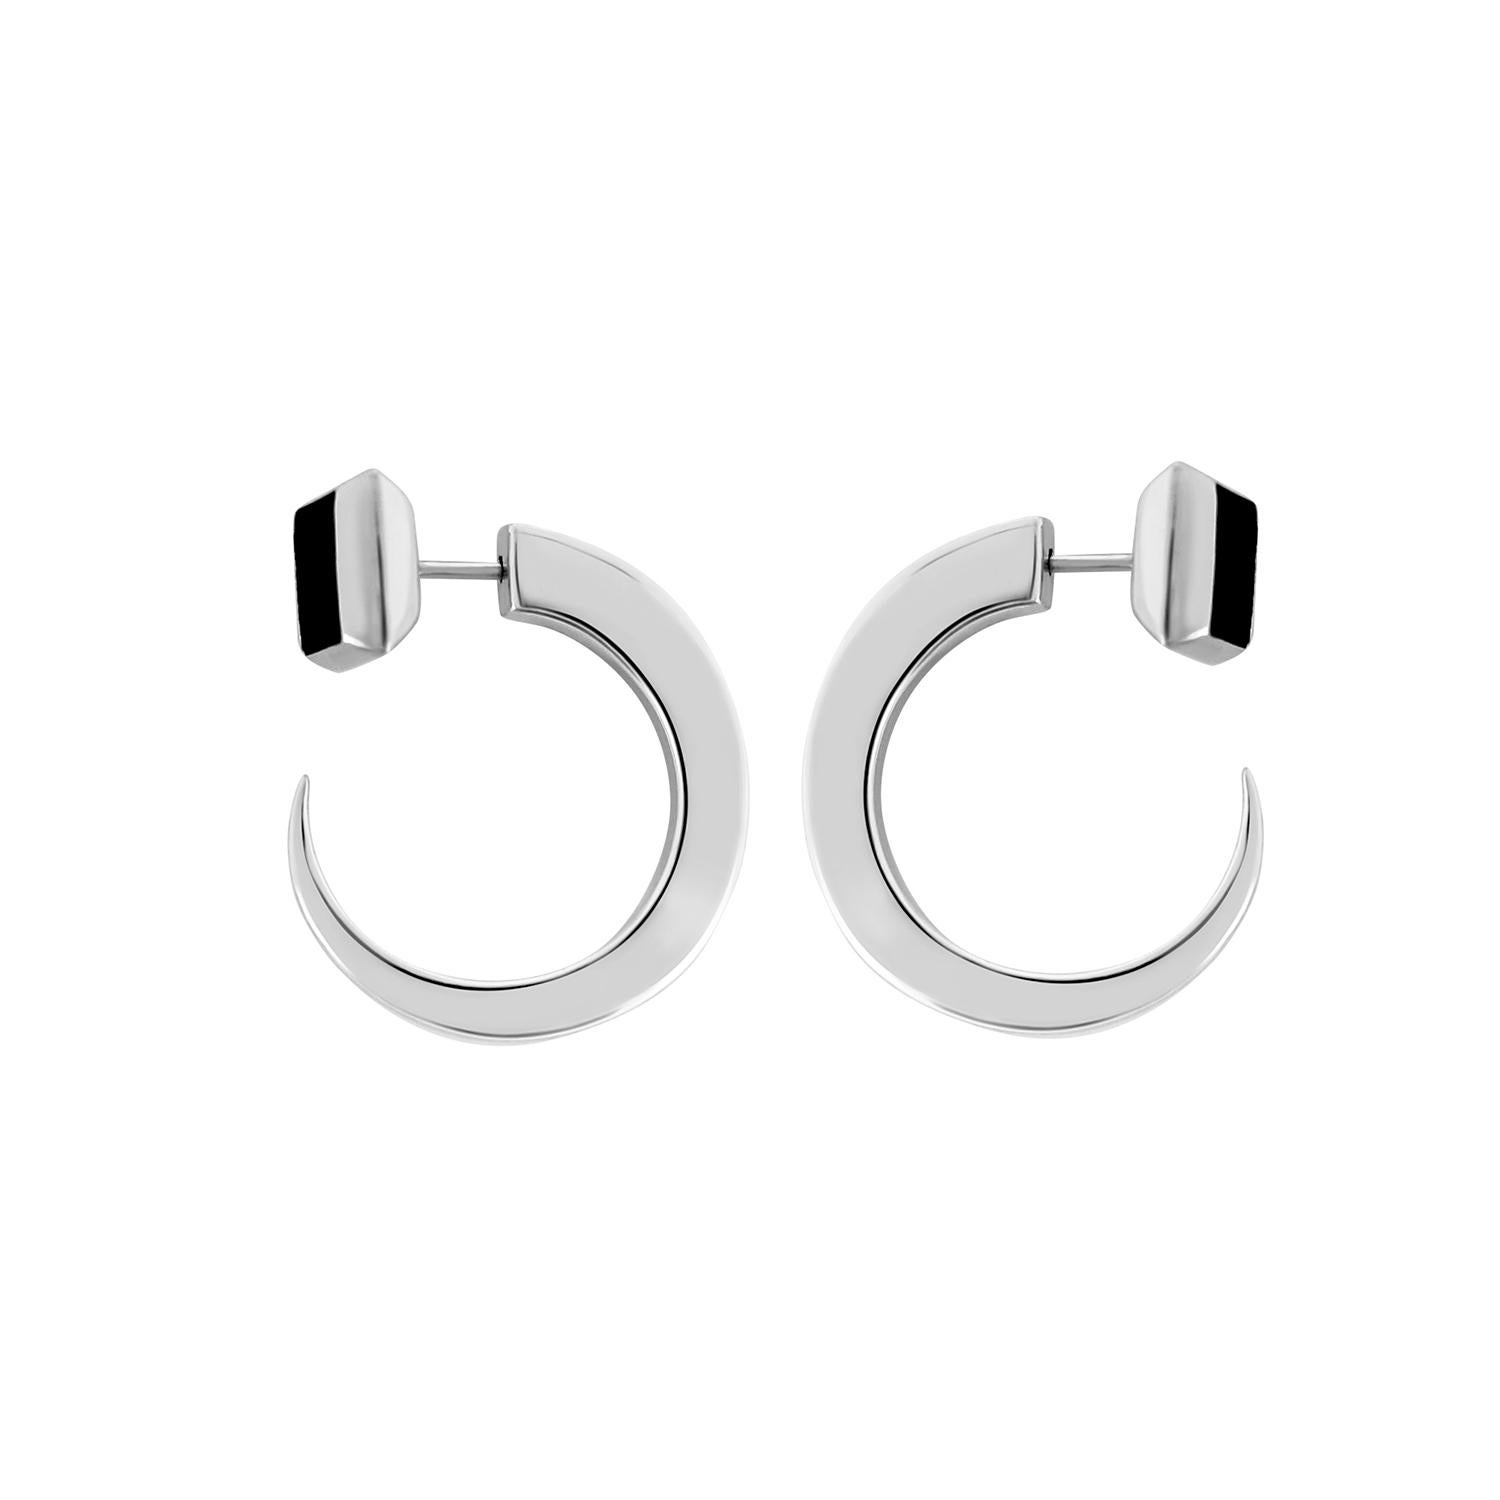 Contemporary Horn Hoop Earrings In Silver With Onyx For Sale